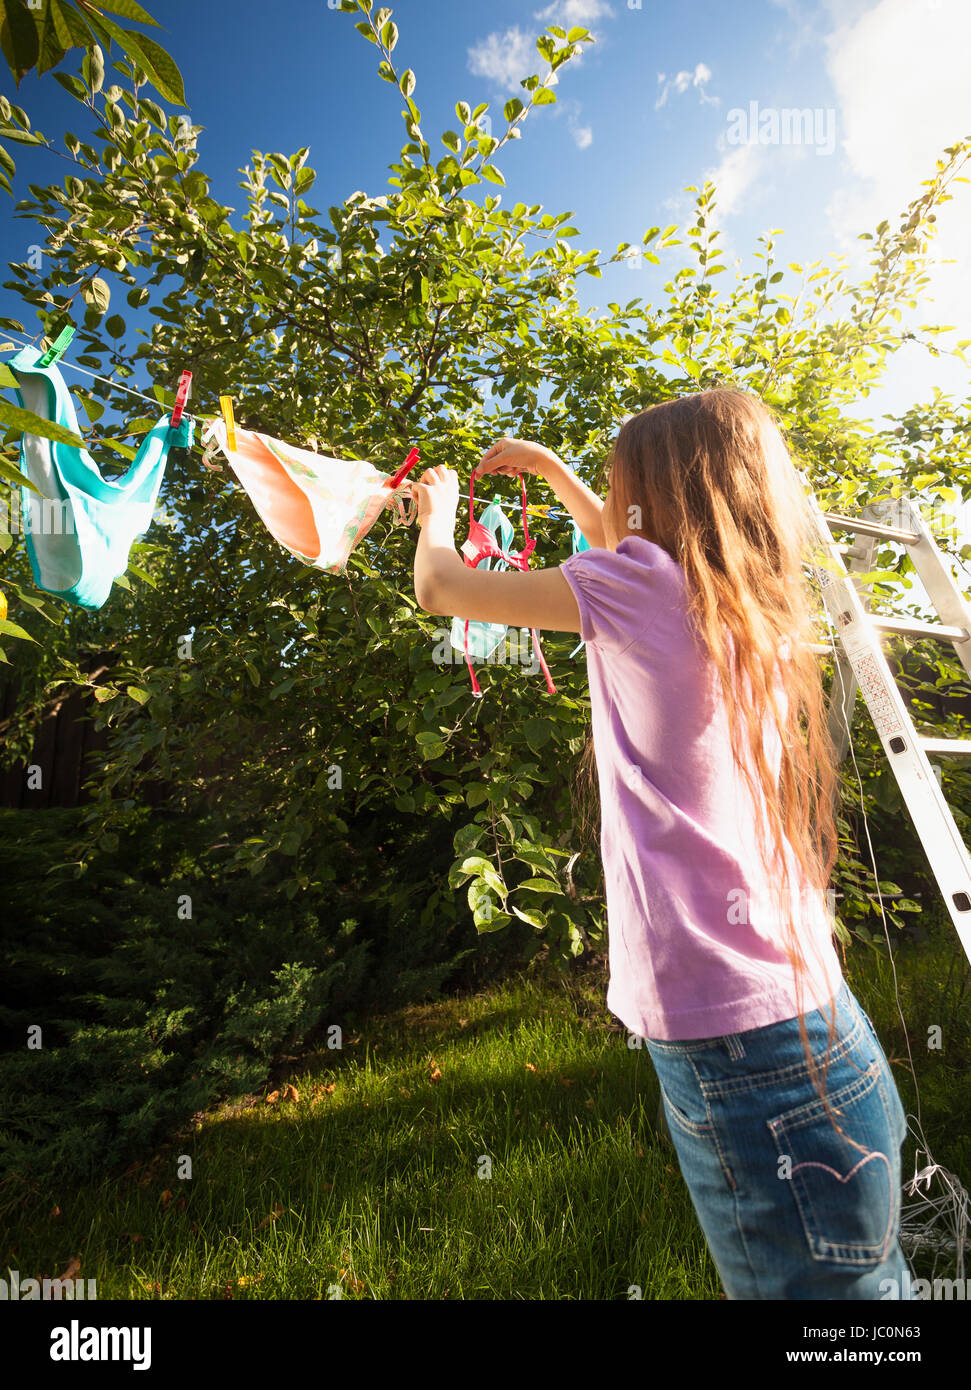 https://c8.alamy.com/comp/JC0N63/outdoor-shot-of-girl-doing-laundry-and-drying-clothes-at-garden-JC0N63.jpg